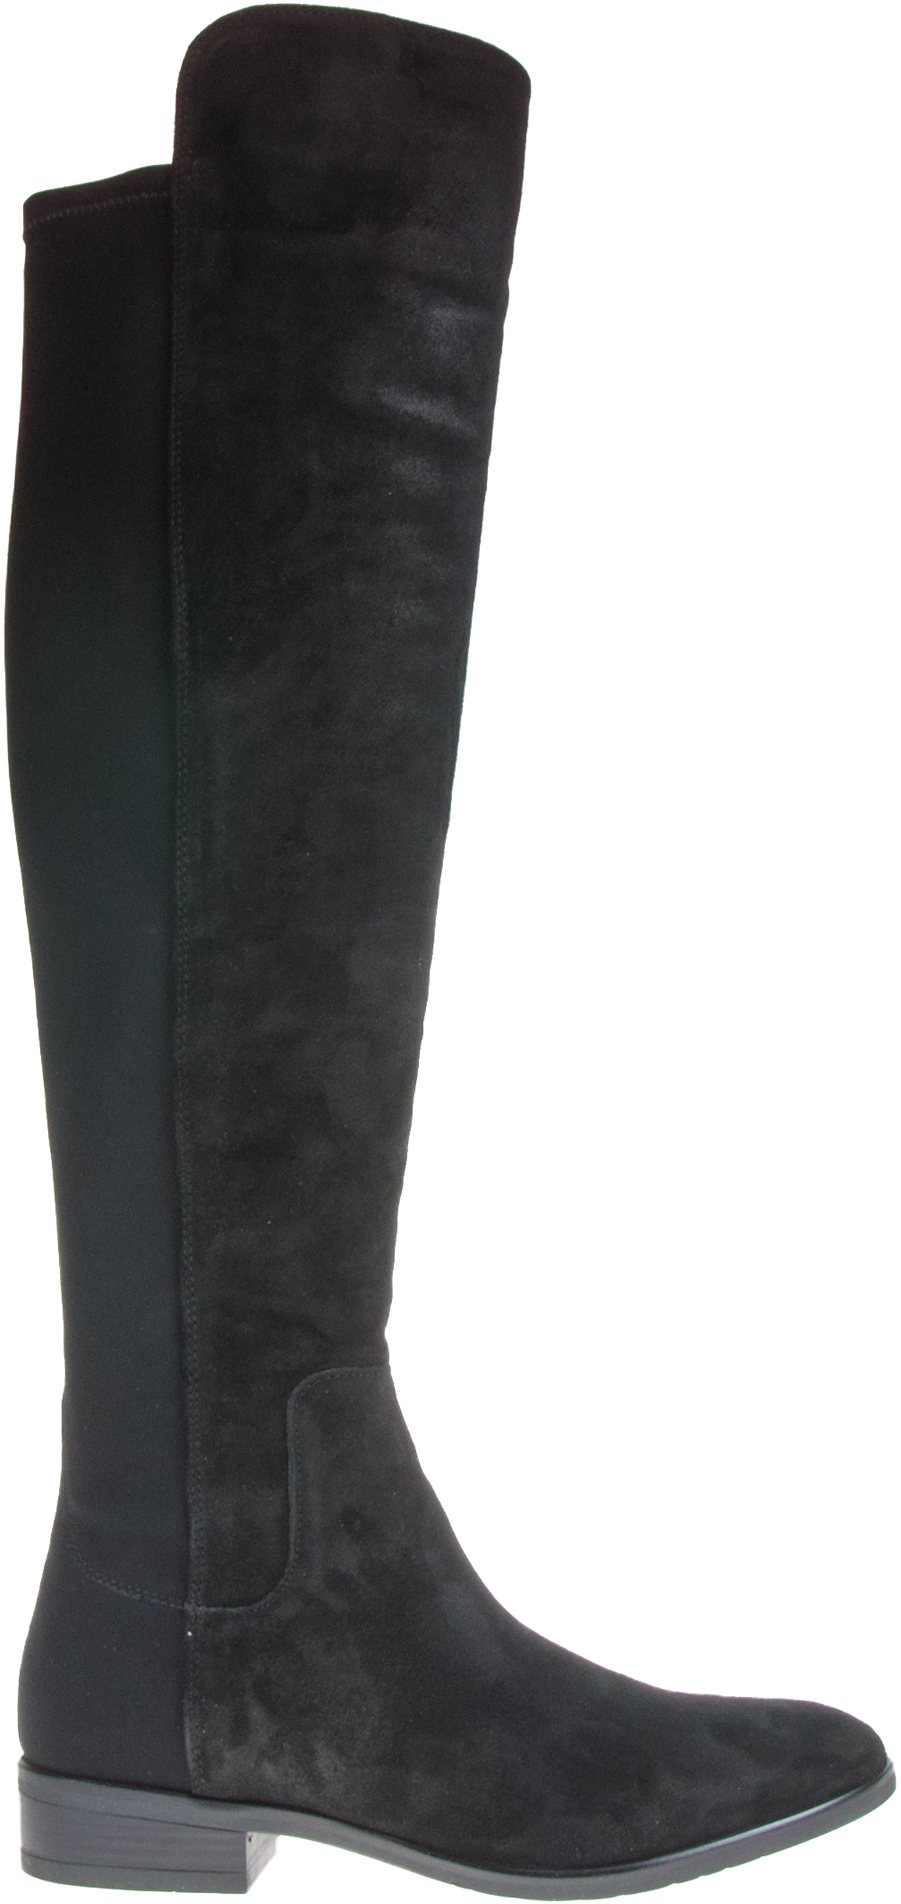 Clarks Caddy Belle Black Suede 26130241 - Over the Knee Boots ...